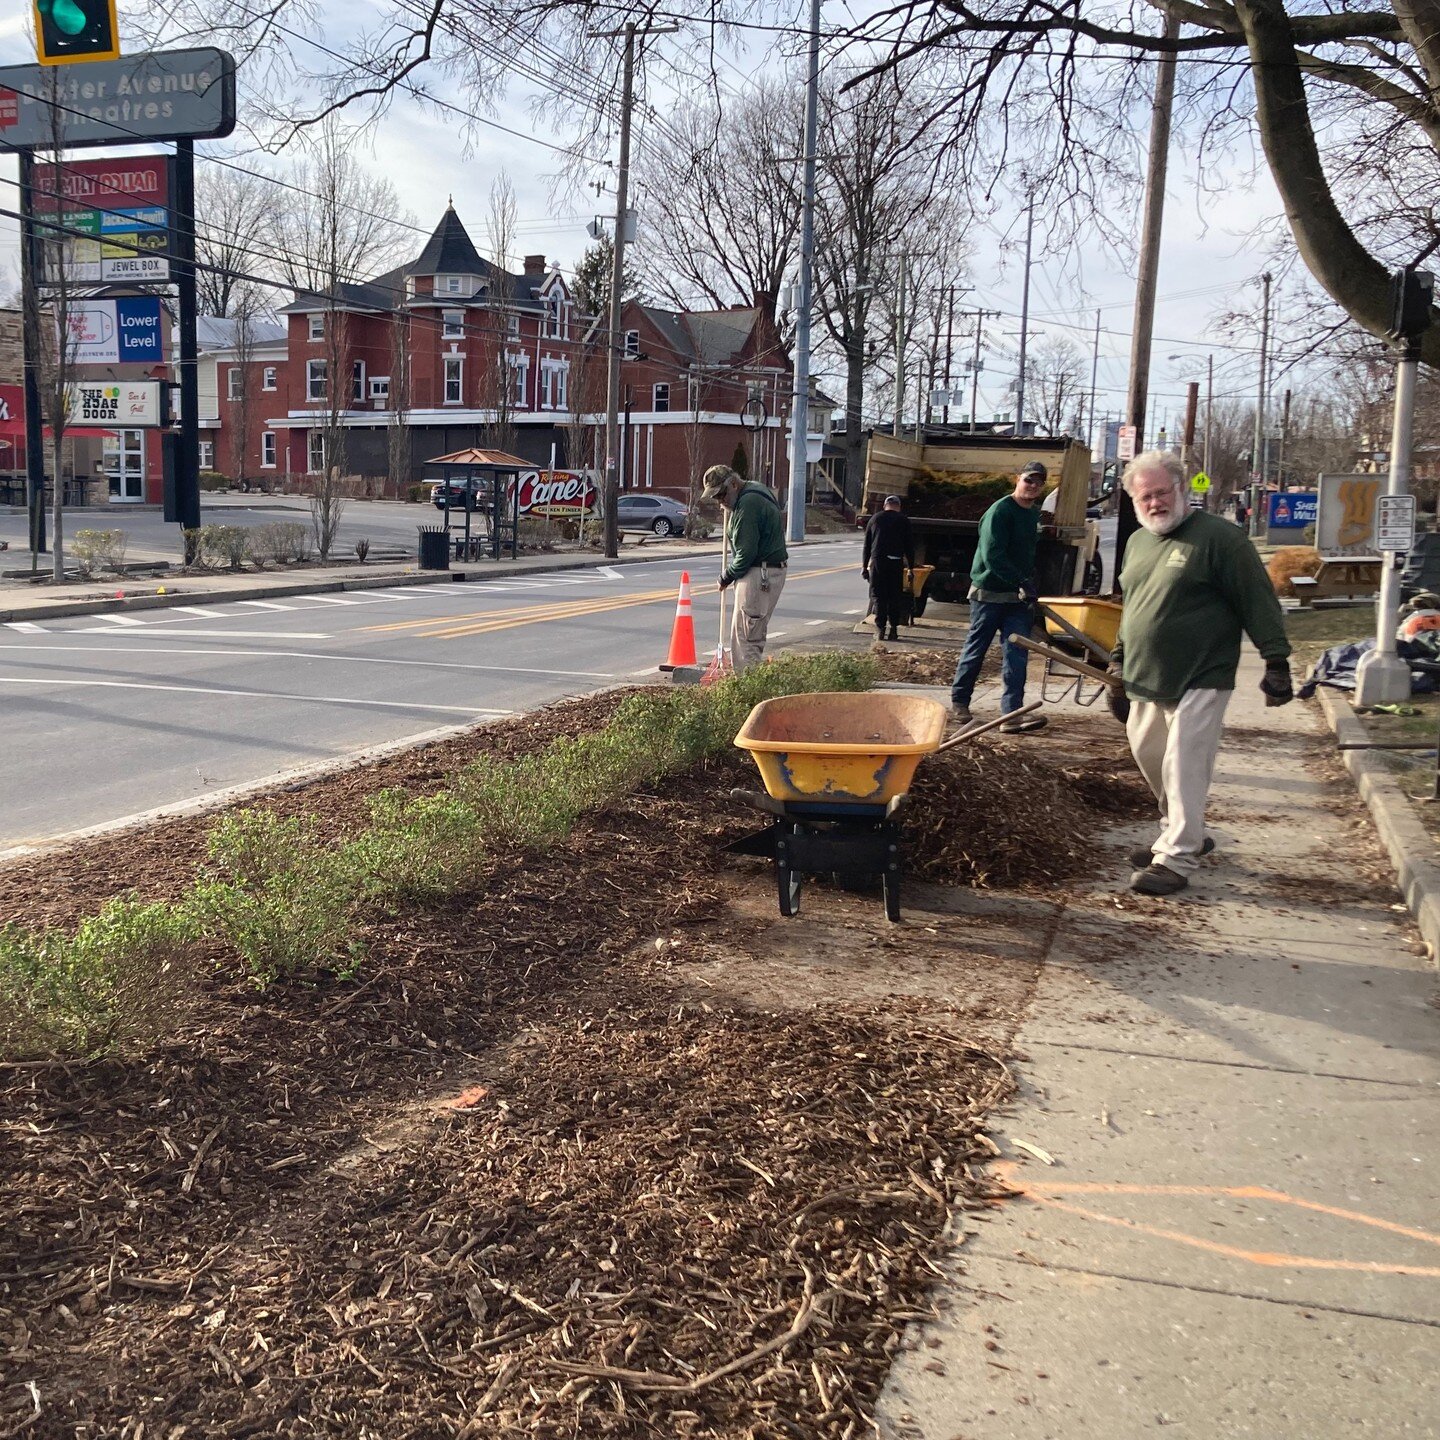 Planting begins on Bardstown Road! 

Over the next 2-3 weeks, the 'bumpouts' along Bardstown Road in the Highlands will be filled with shrubs, grasses, and flowers.

Fully-funded by us - The Friends of Bardstown Road

Donate here to support our work!